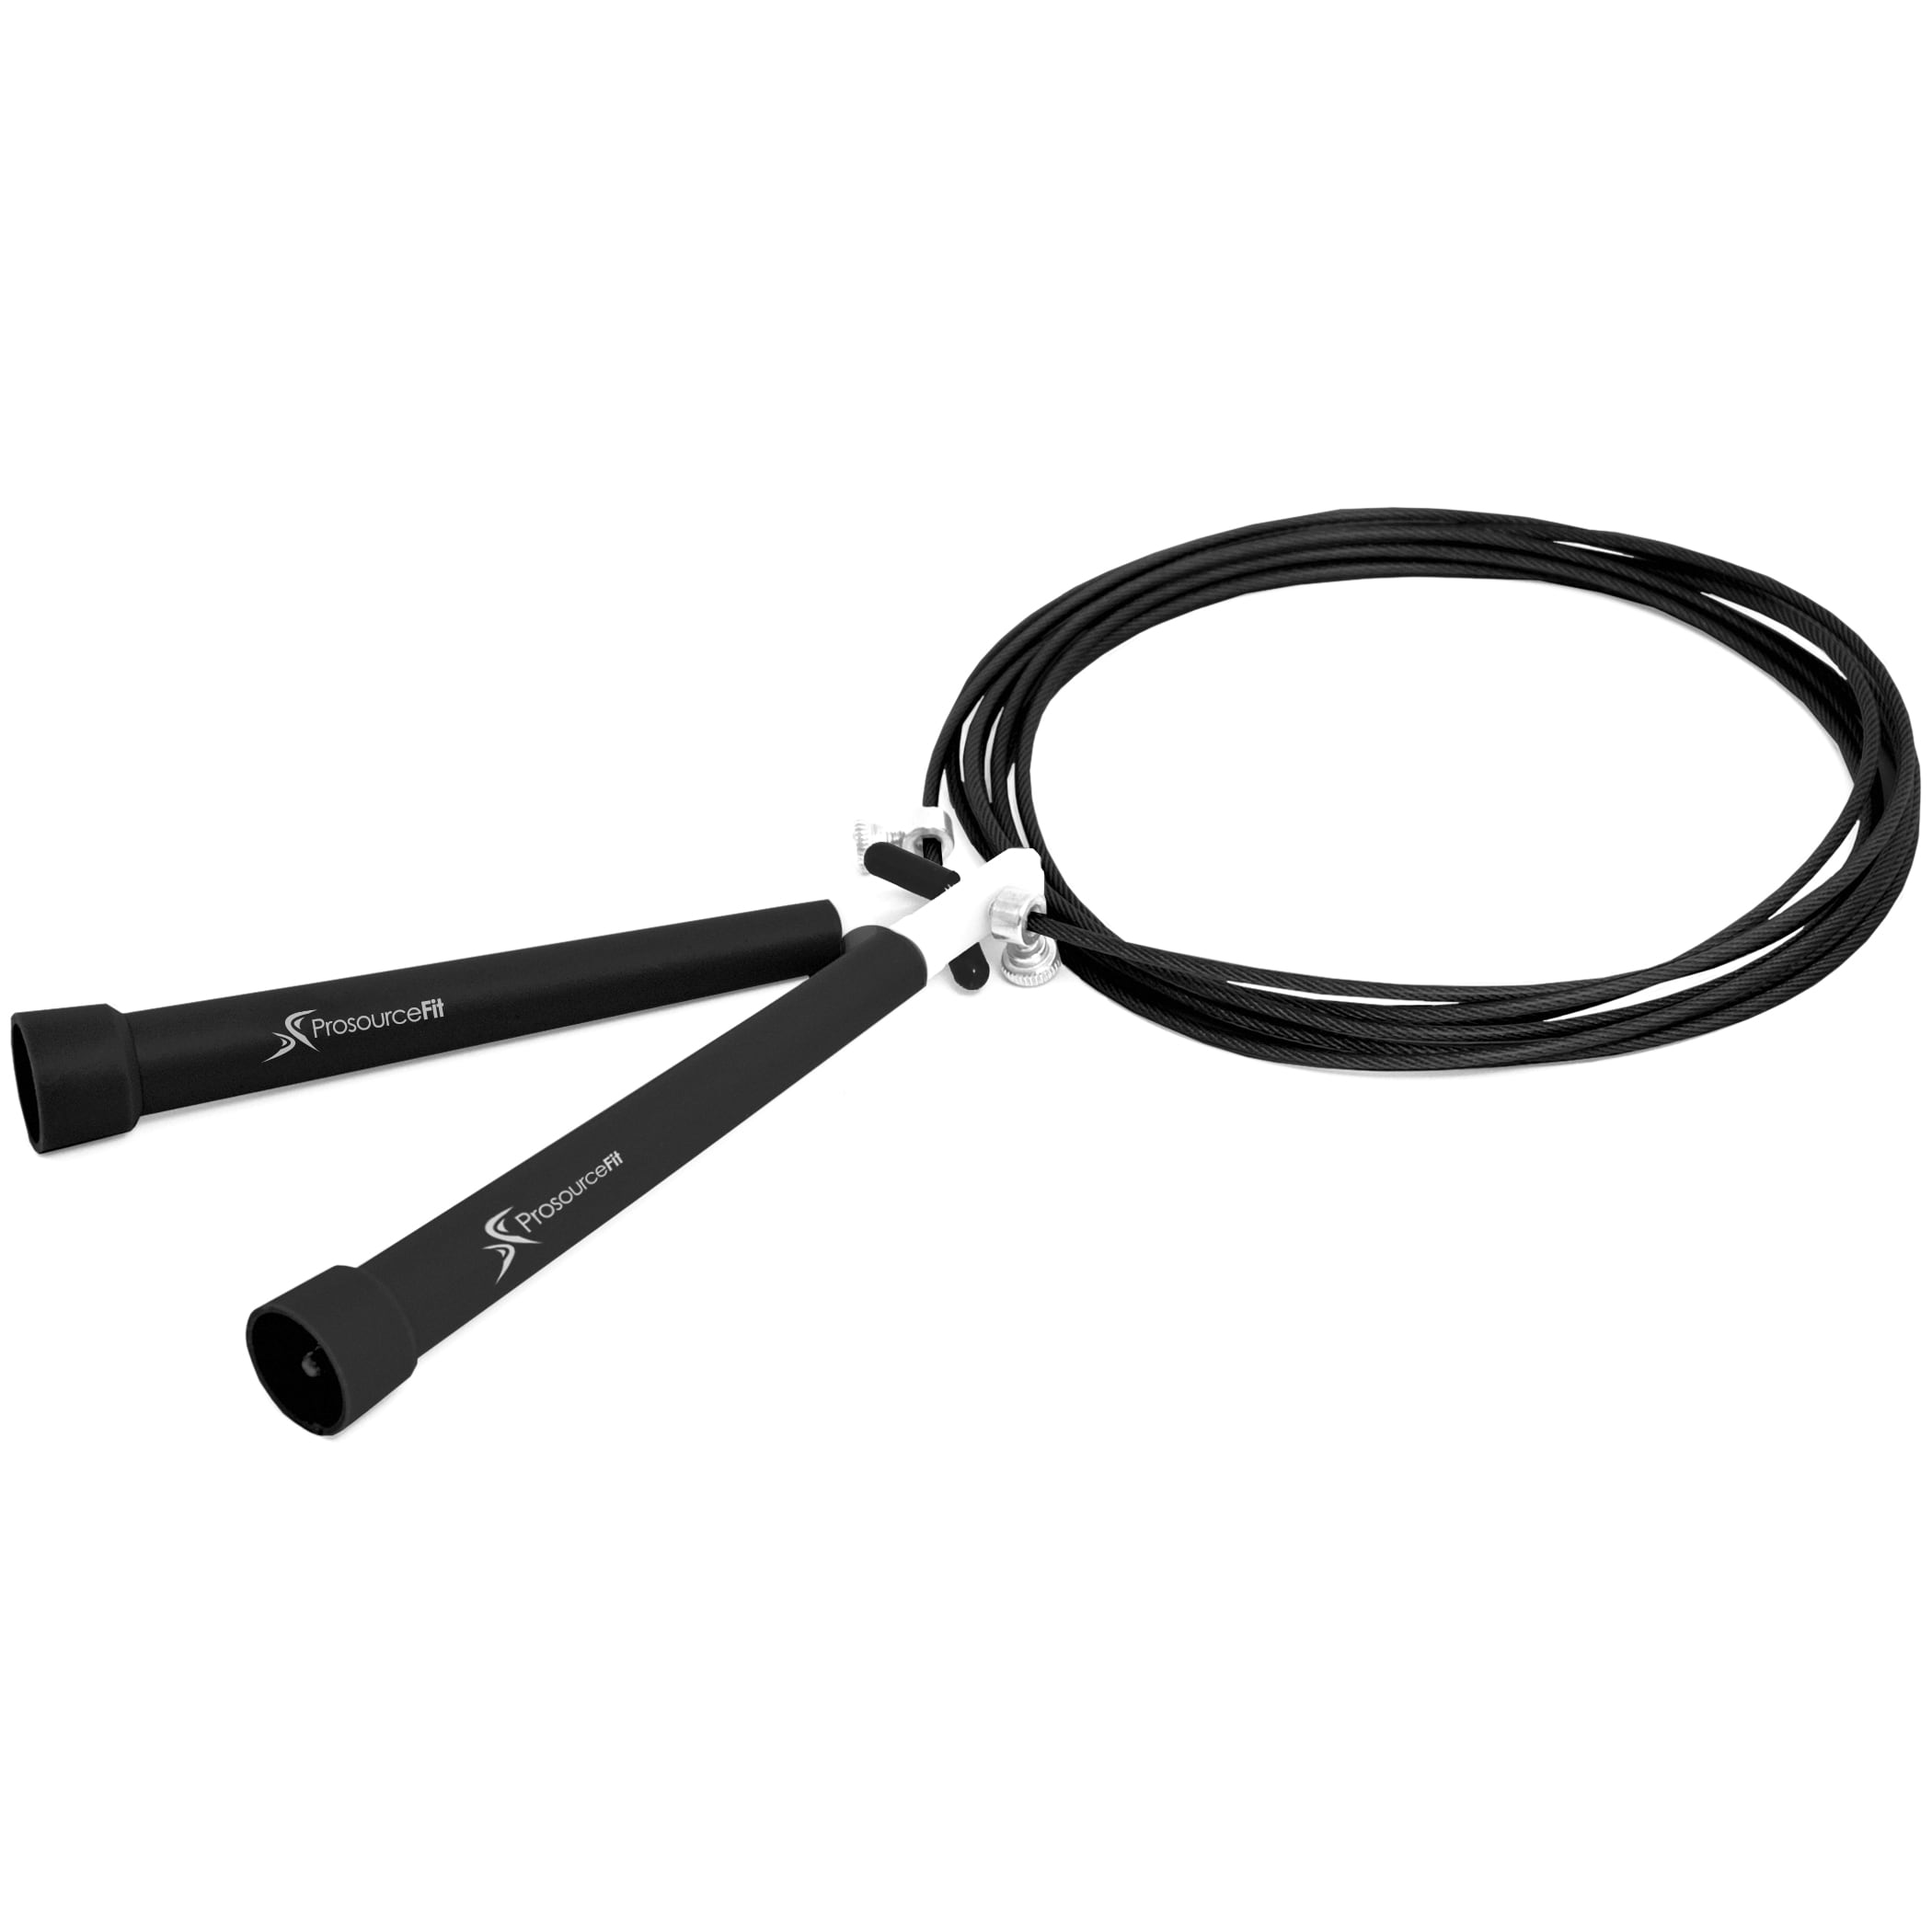 SPORTBIT Adjustable Jump Rope for Speed Skipping. Lightweight Jump Rope for  Women, Men, and Kids. Skipping Rope for Fitness. Speed Jump Rope for  Workout, Women Exercise. Black Plastic Handles